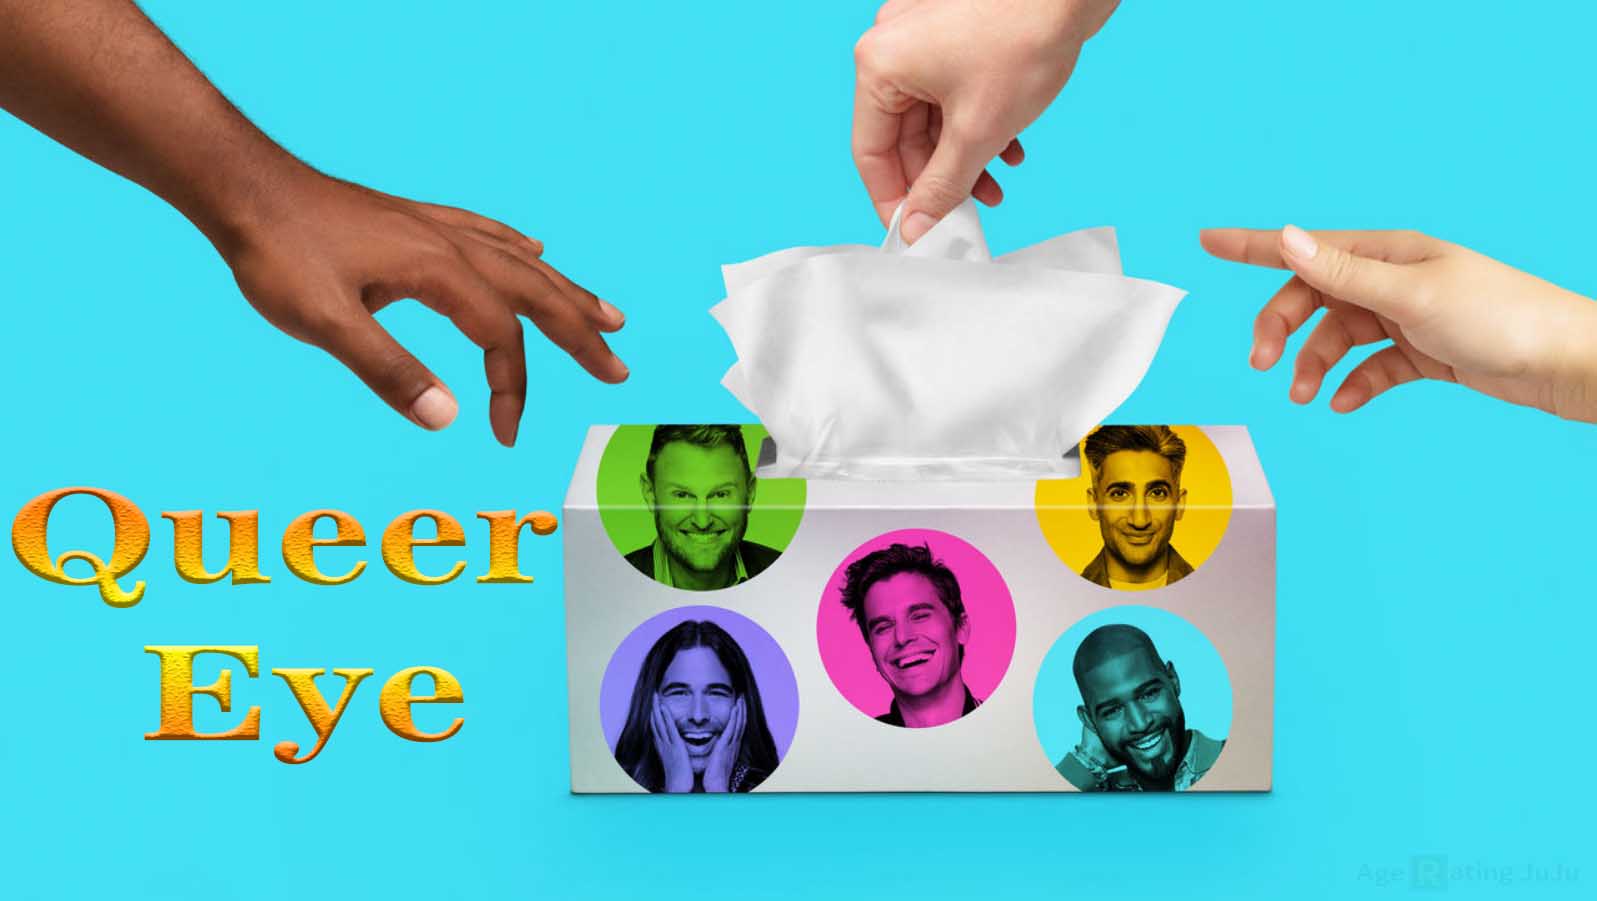 Queer Eye Age Rating 2018 - TV Show Netflix Poster Images and Wallpapers